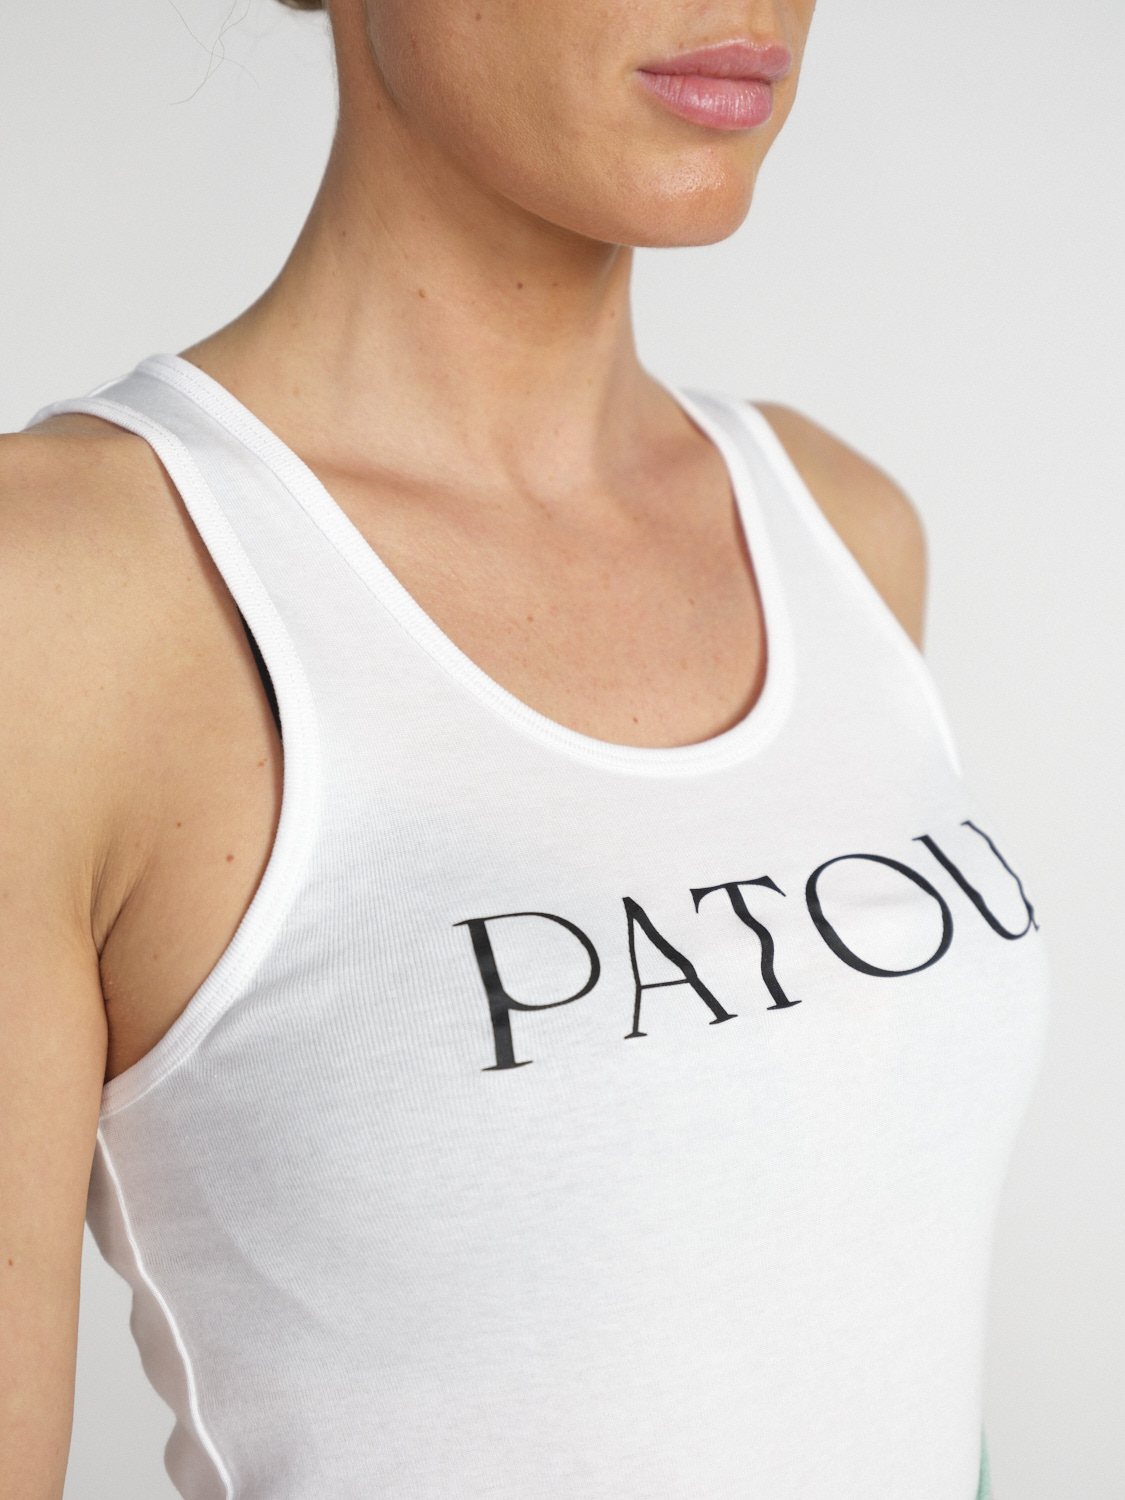 Patou Iconic Tank - Tank top made from organic cotton  white S